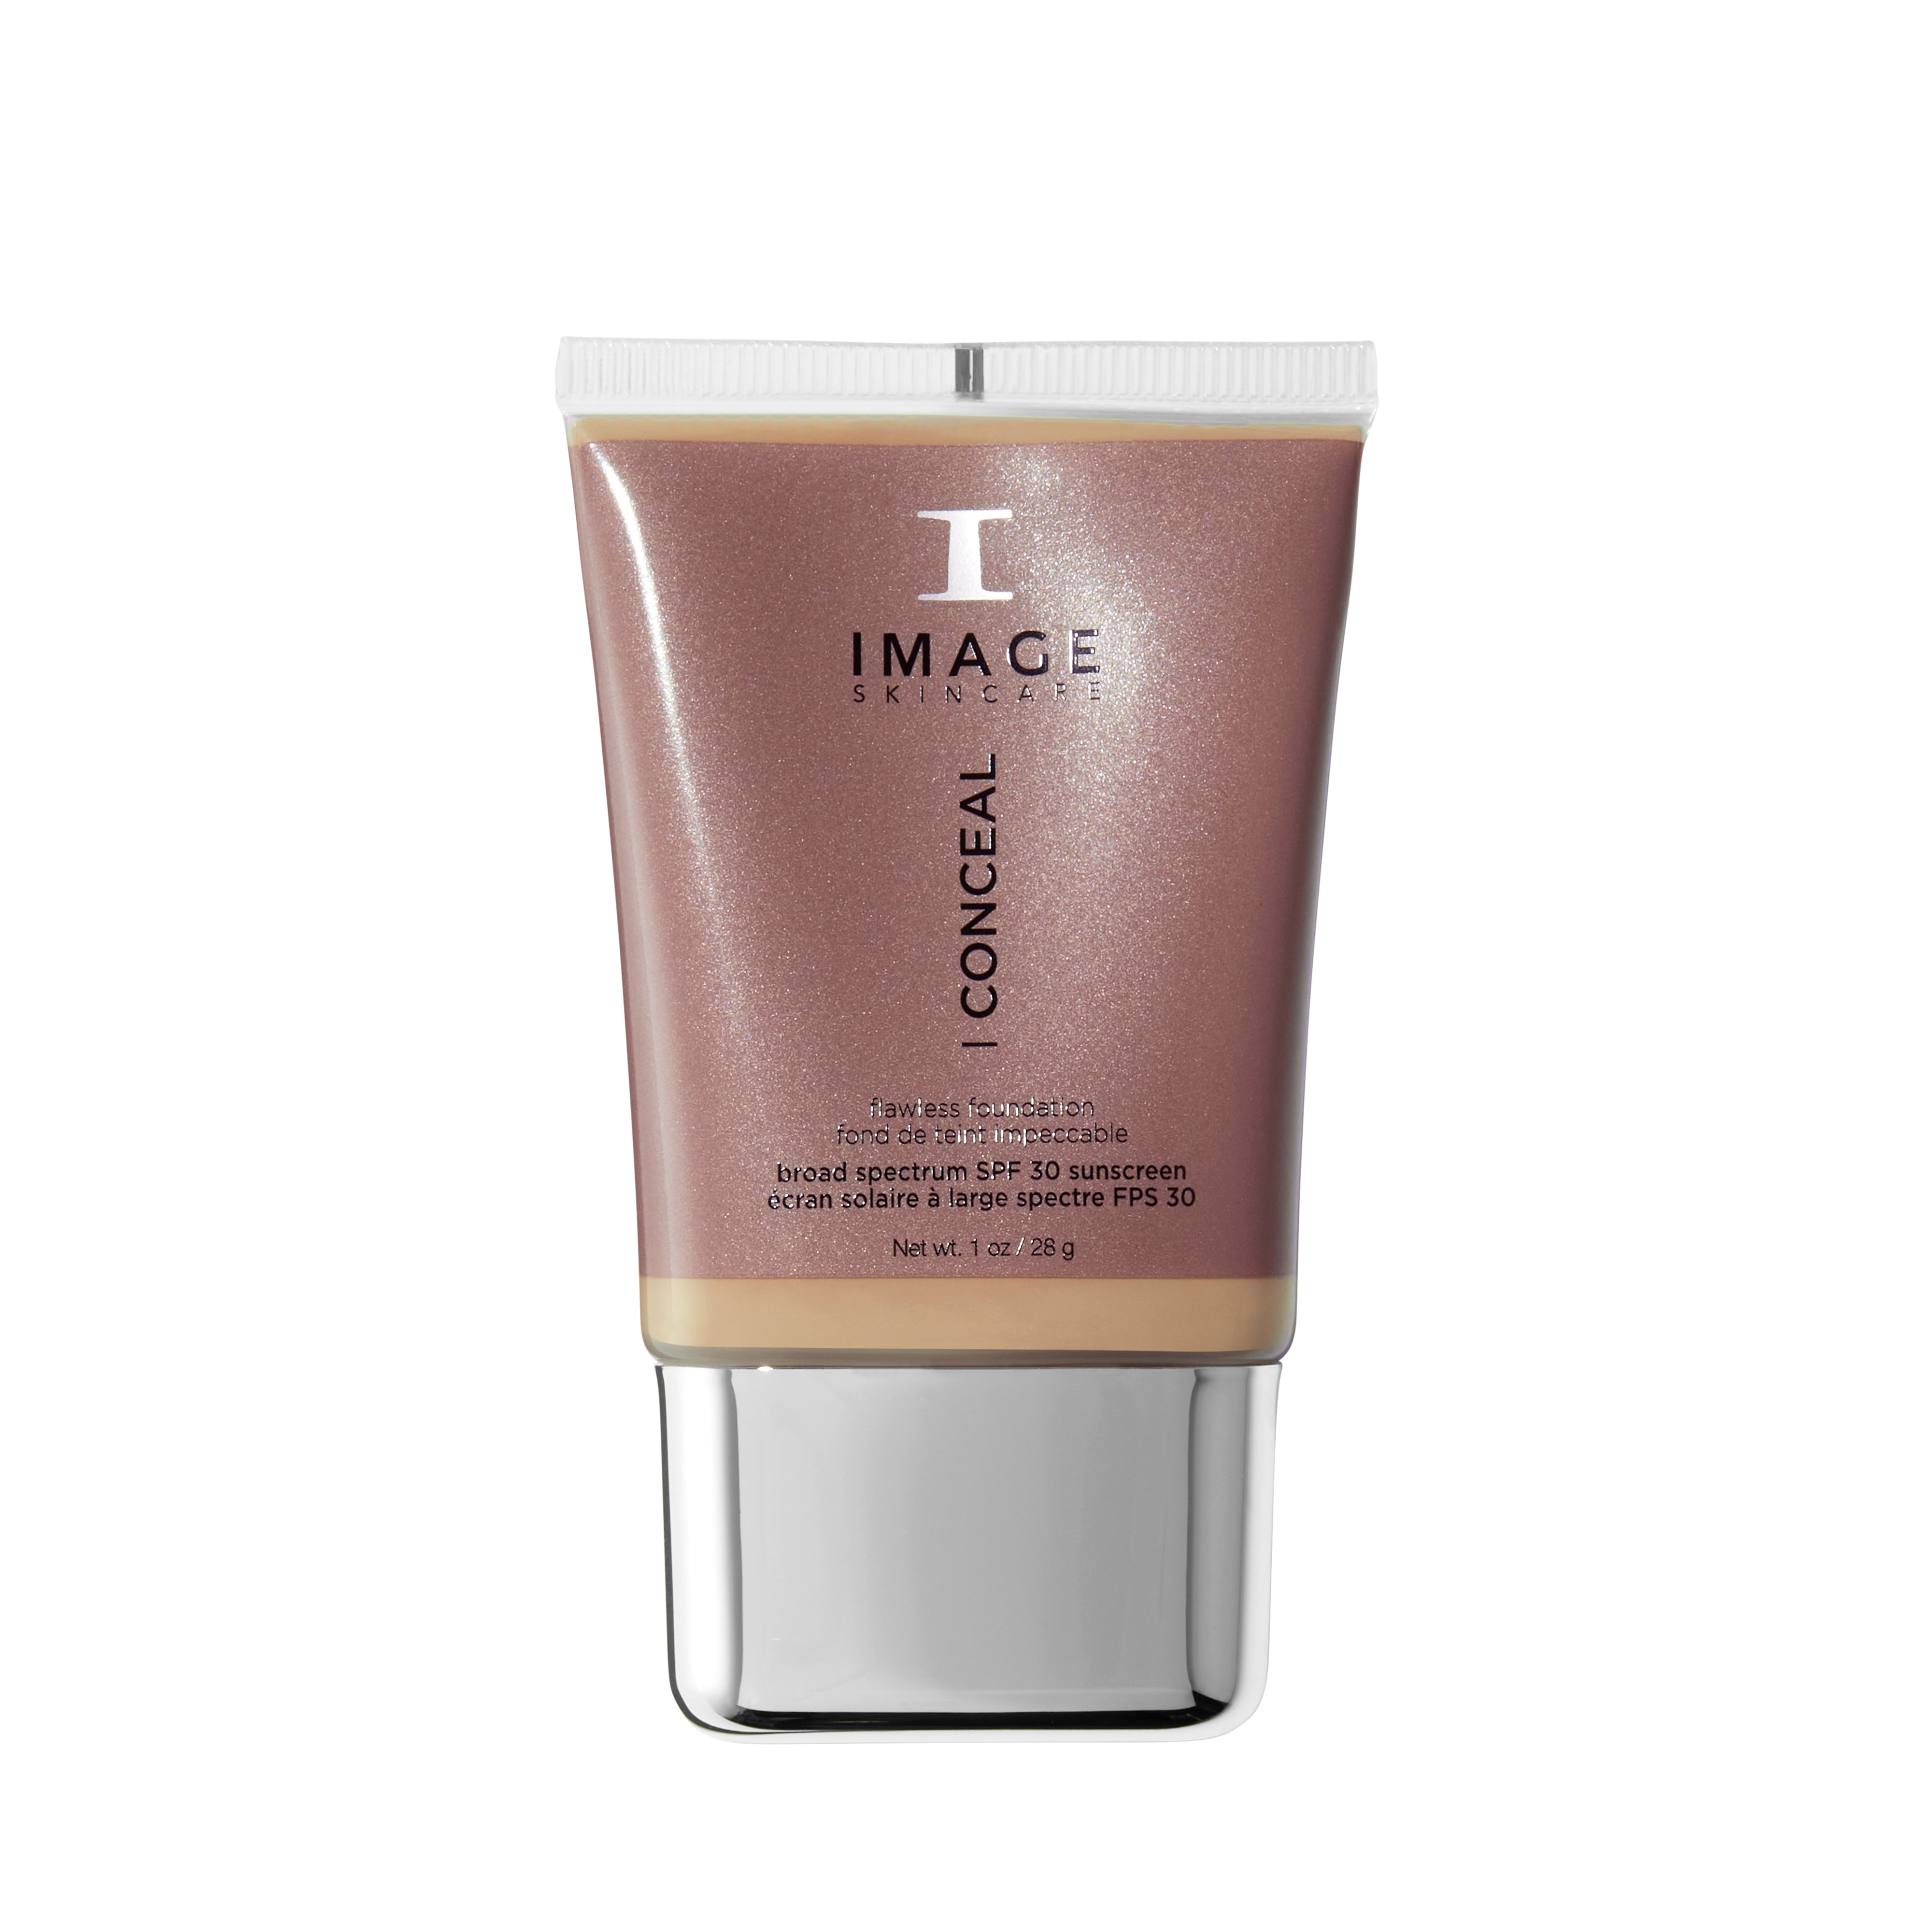 I CONCEAL flawless foundation broad-spectrum SPF 30 sunscreen suede